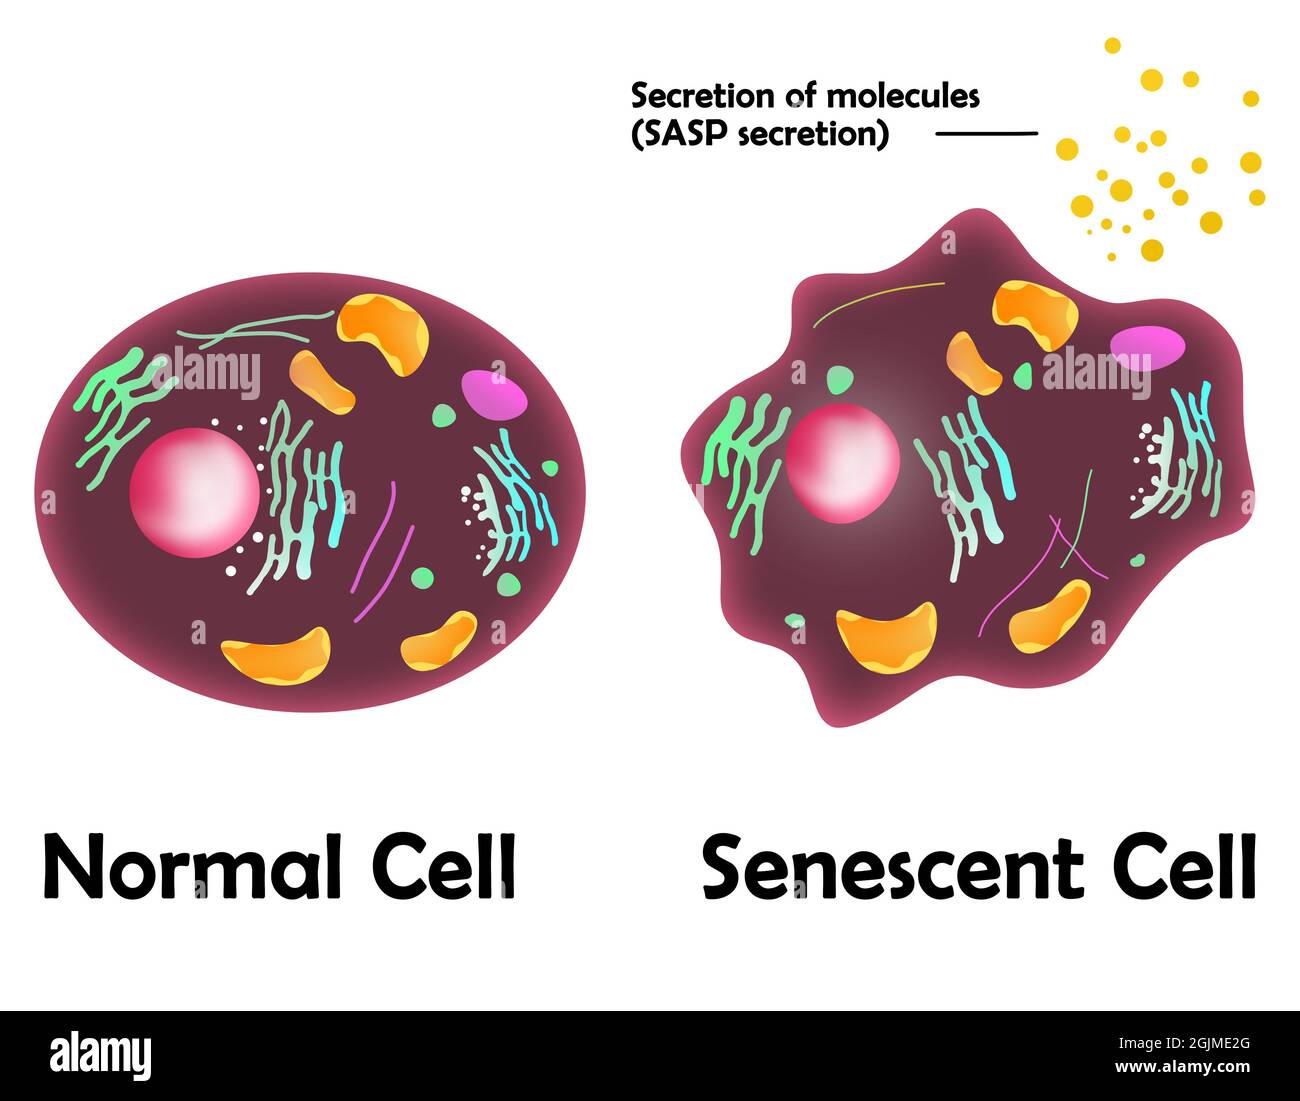 Senescent cell and normal cell. Secreation of molecules Stock Photo